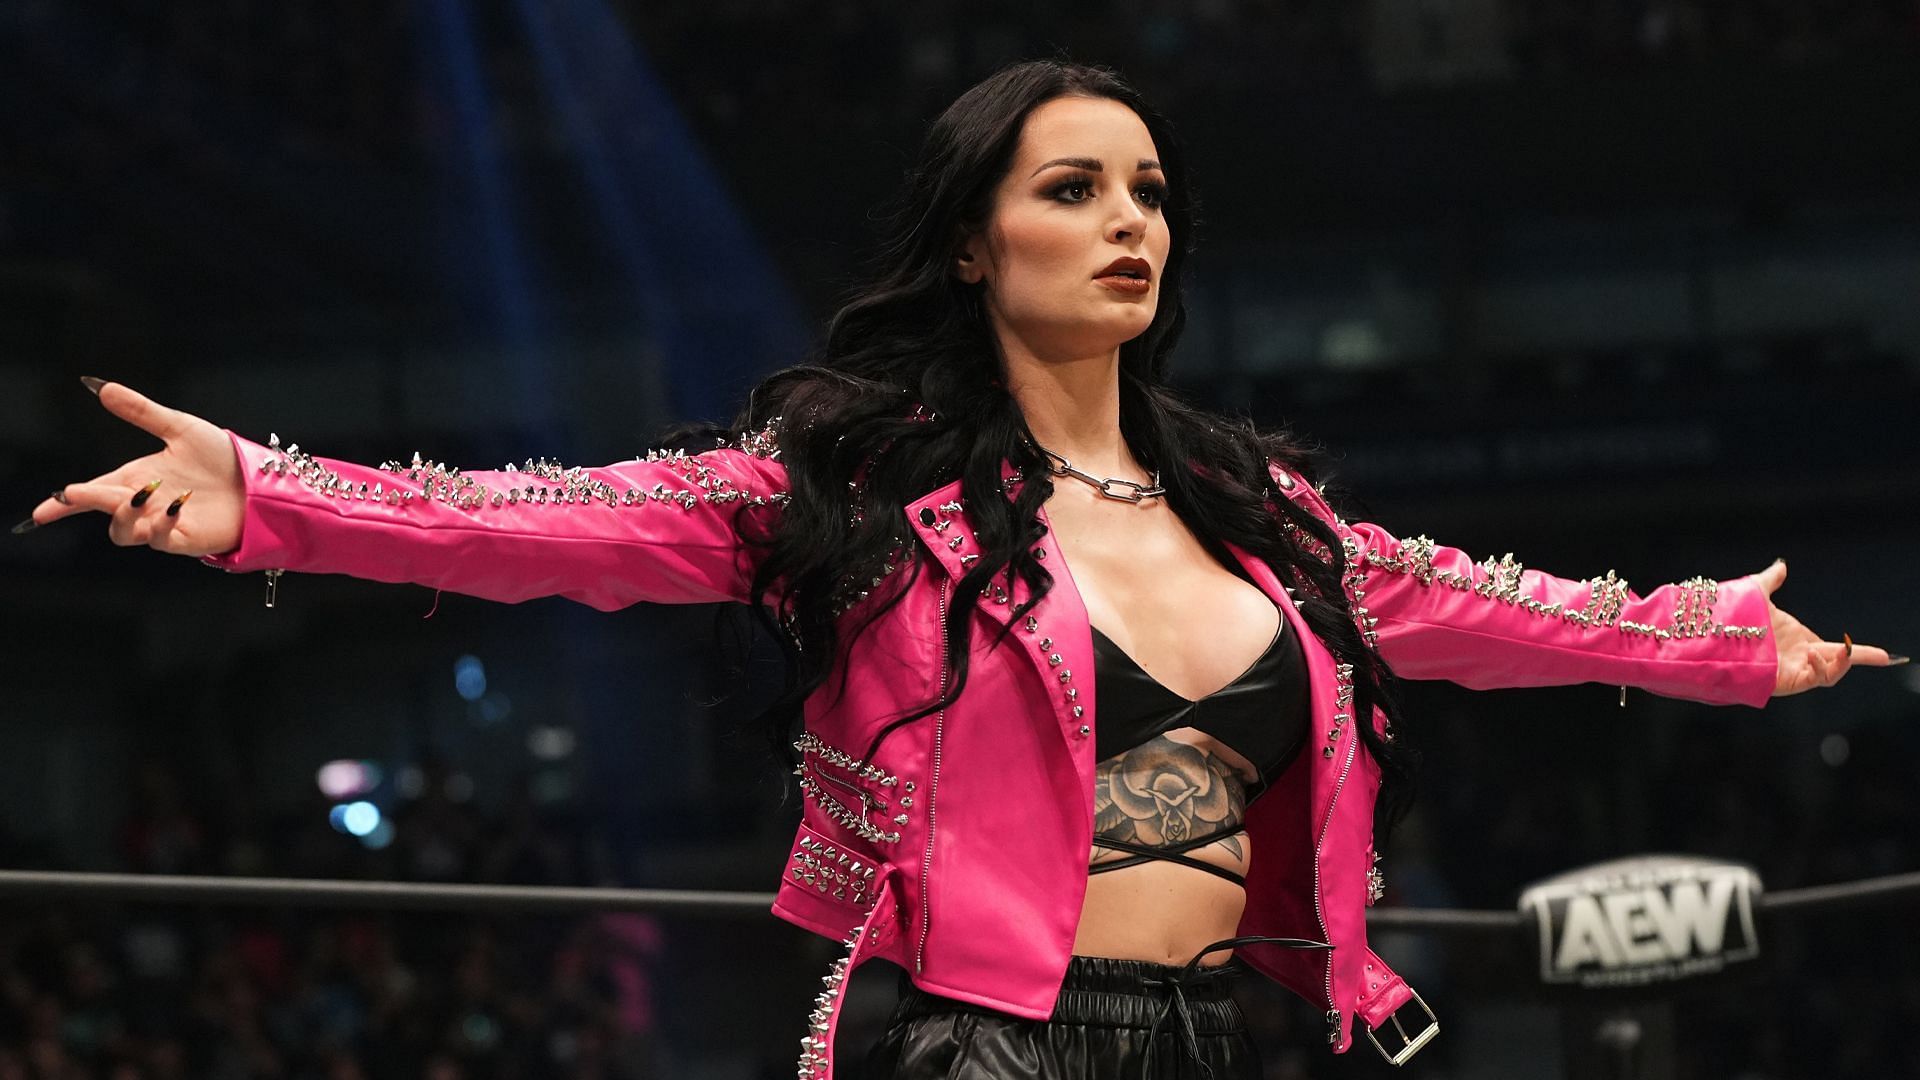 Saraya has been out of action for a while (image credit: All Elite Wrestling)